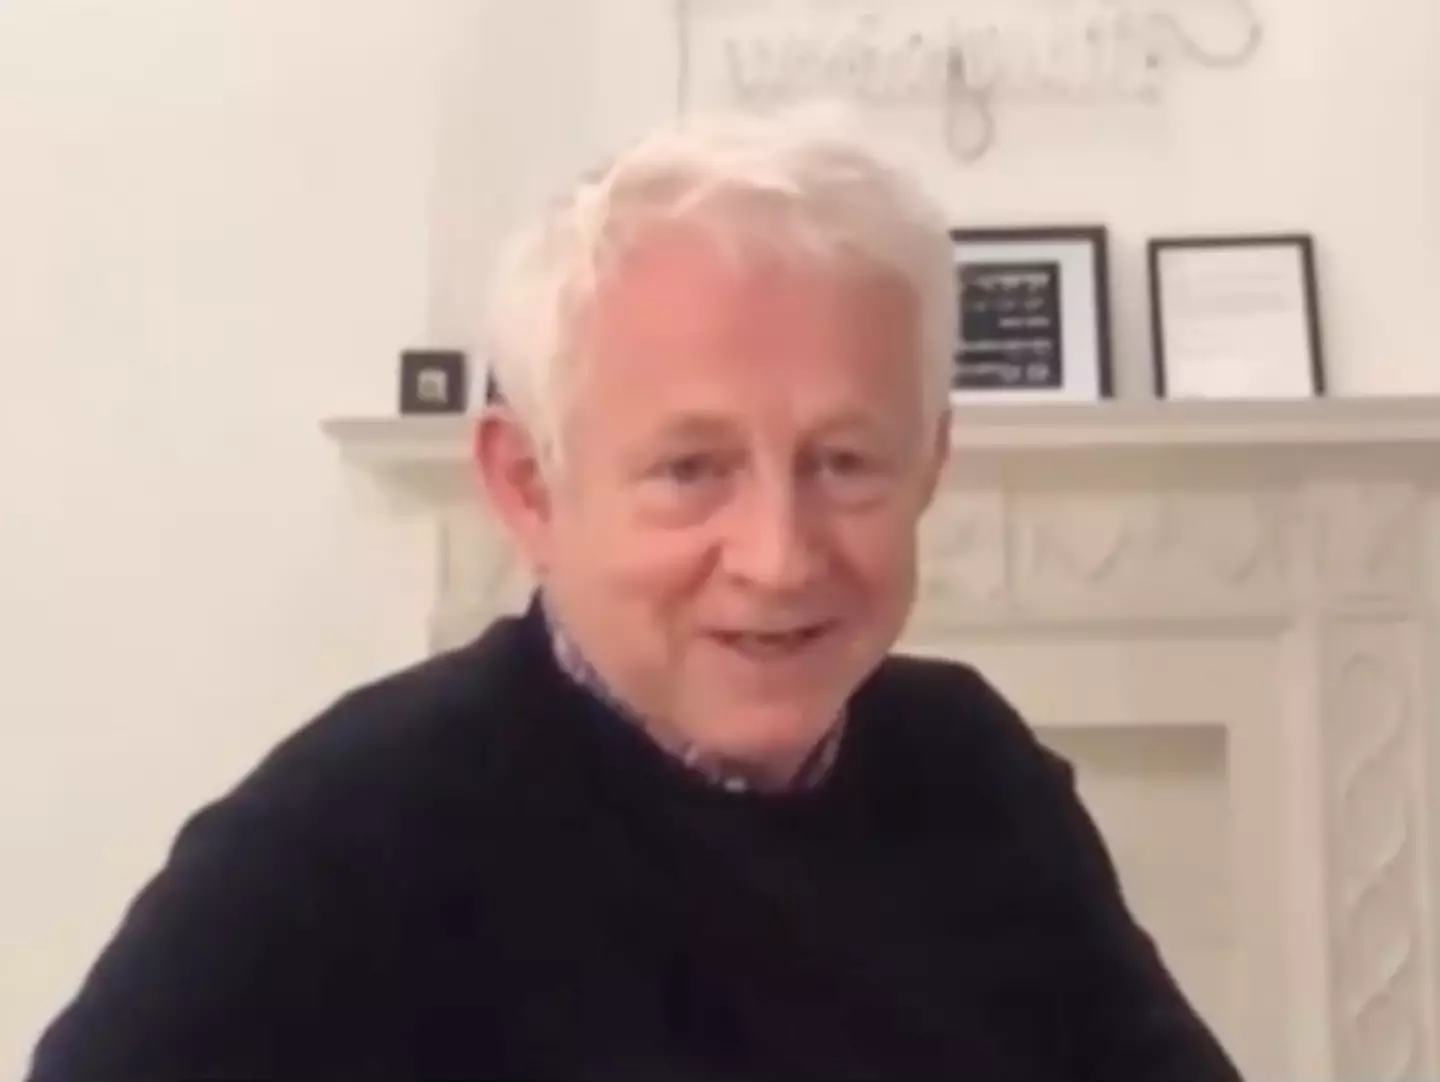 Richard Curtis recently admitted there are aspects of the film that he regrets.